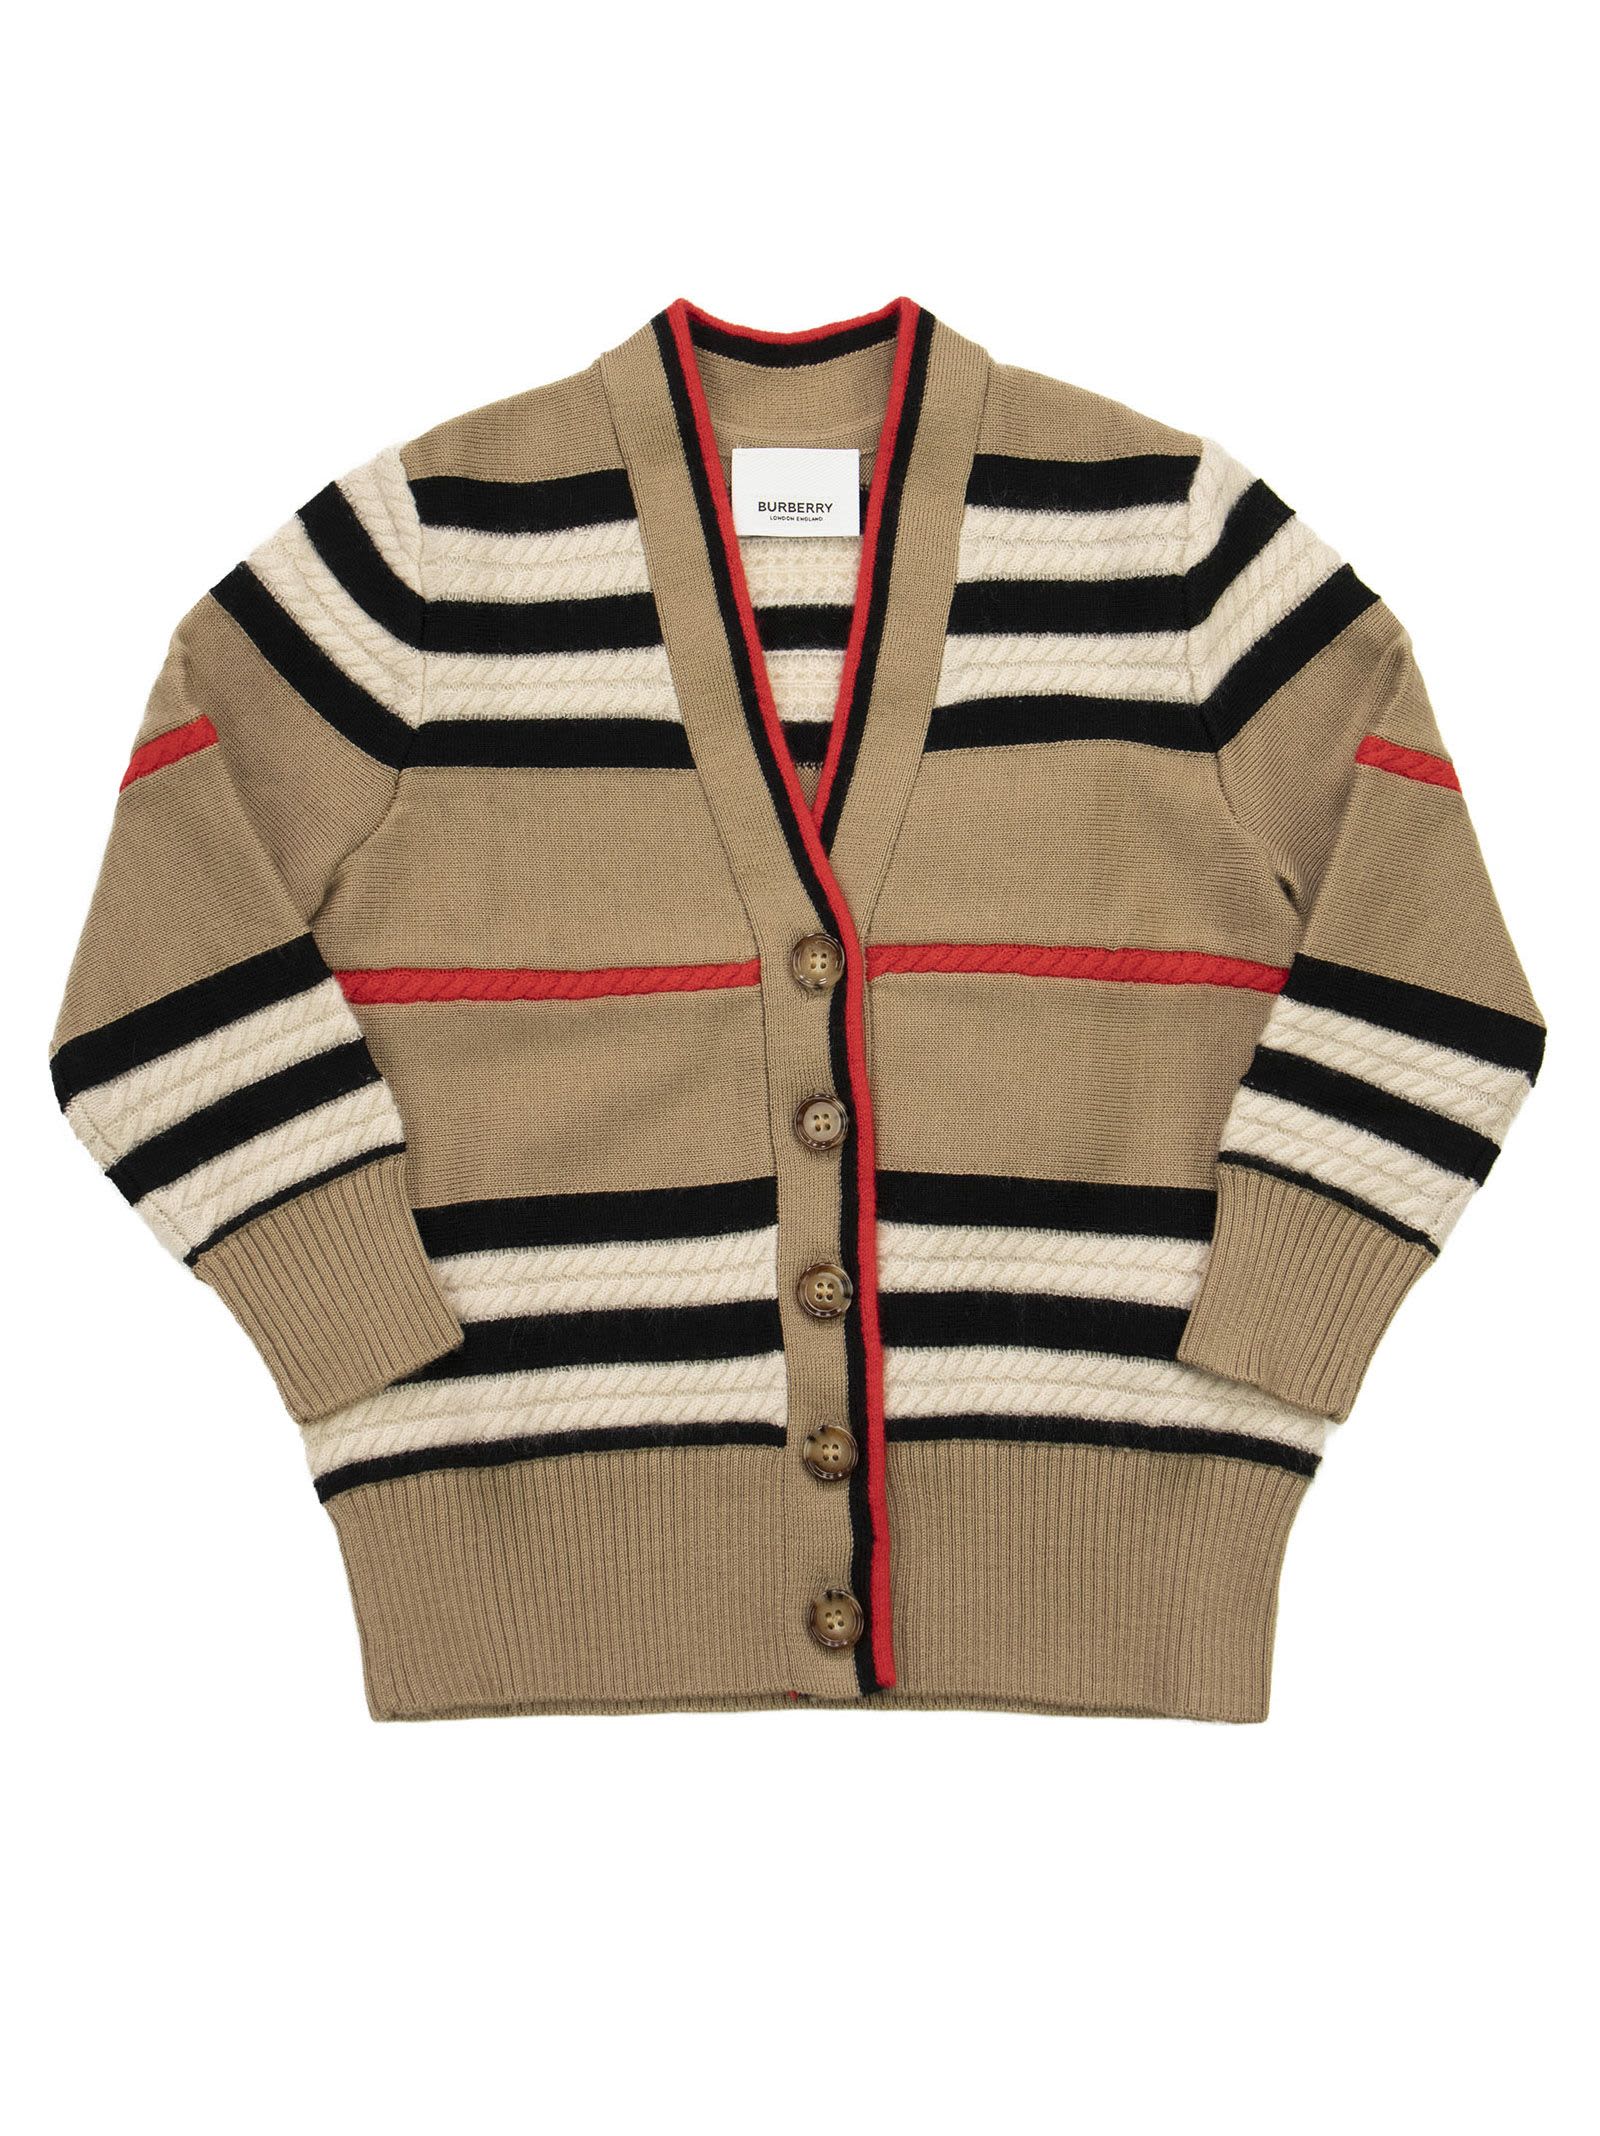 Burberry Leeta - Wool And Cashmere Cardigan With Iconic Striped Pattern